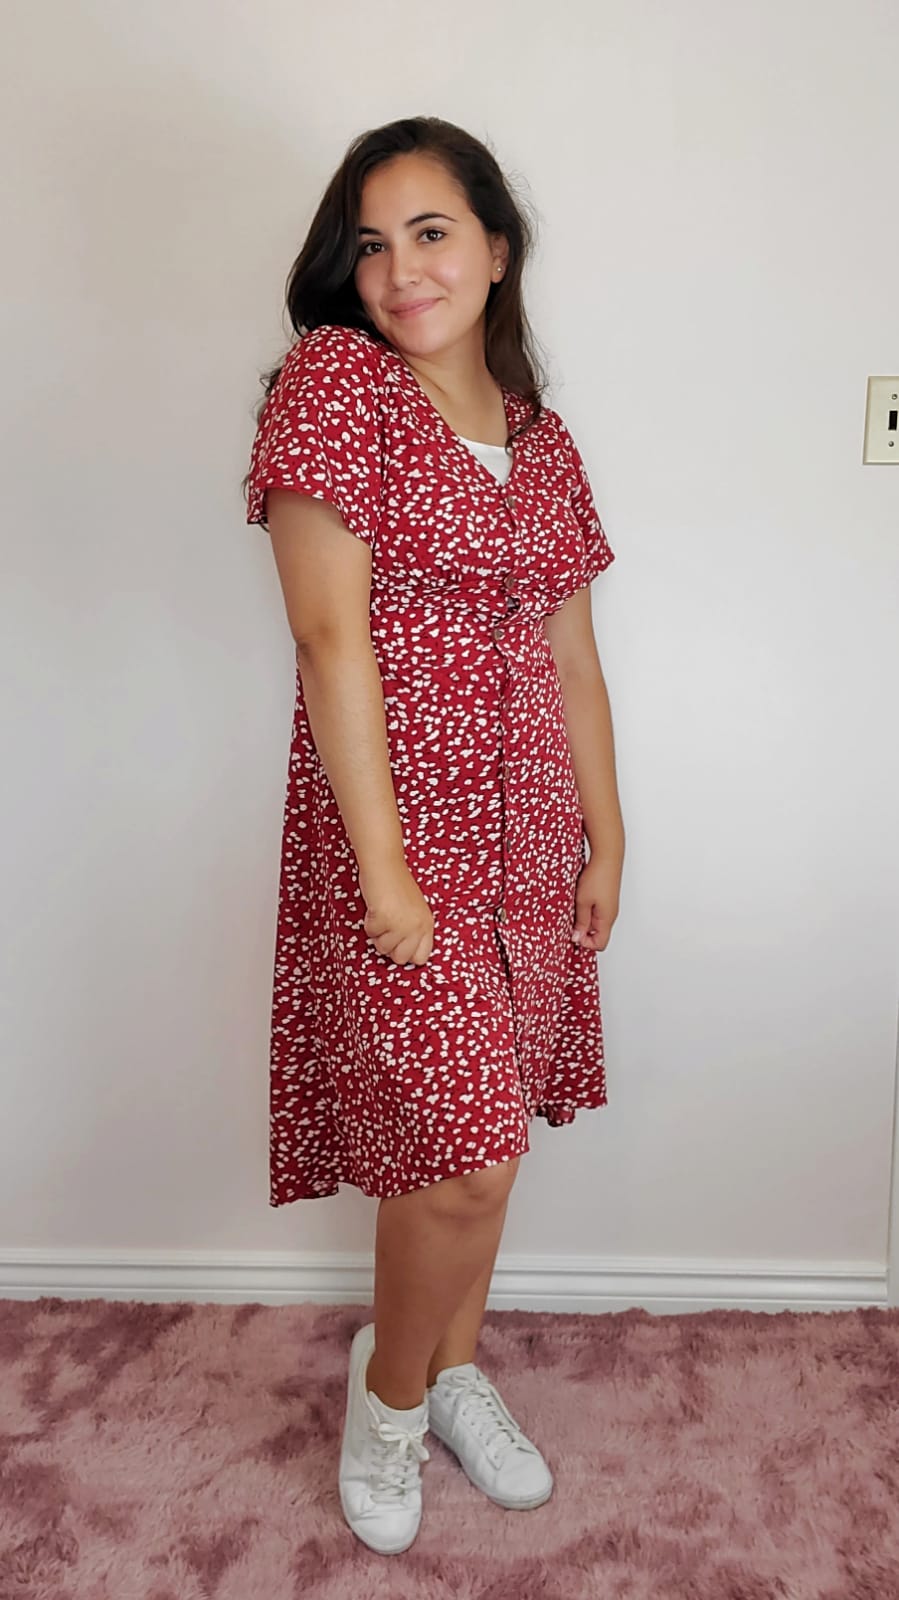 Shein Ditsy Floral Print Button Front Dress - Midi Red Floral Dress - Modest OOTD - Modest Outfit Ideas - Christian and Catholic Modesty - Midi Summer Dress with White Nike Sneakers